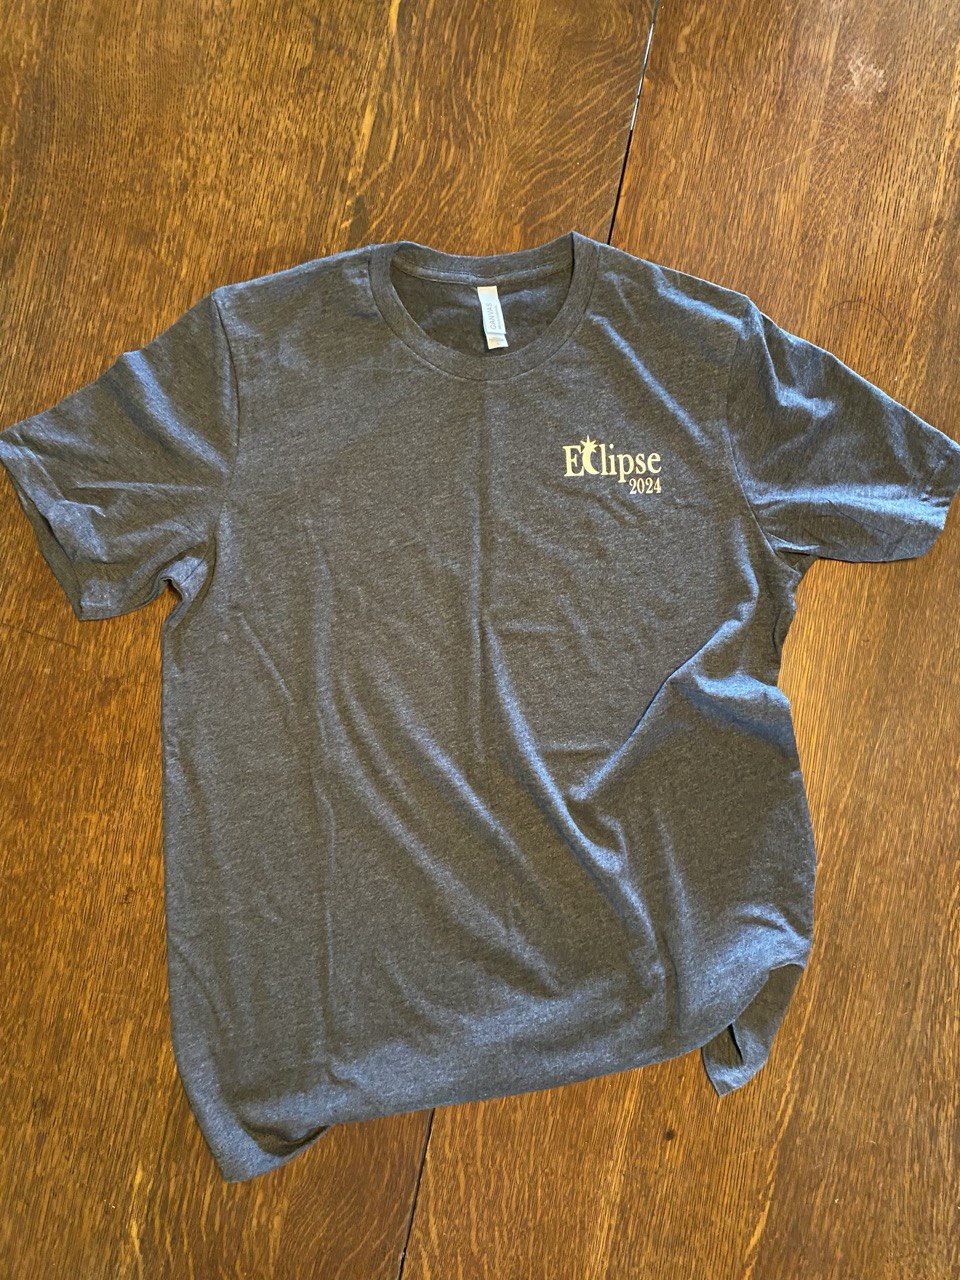 Total Eclipse Tee - Pocket and Back